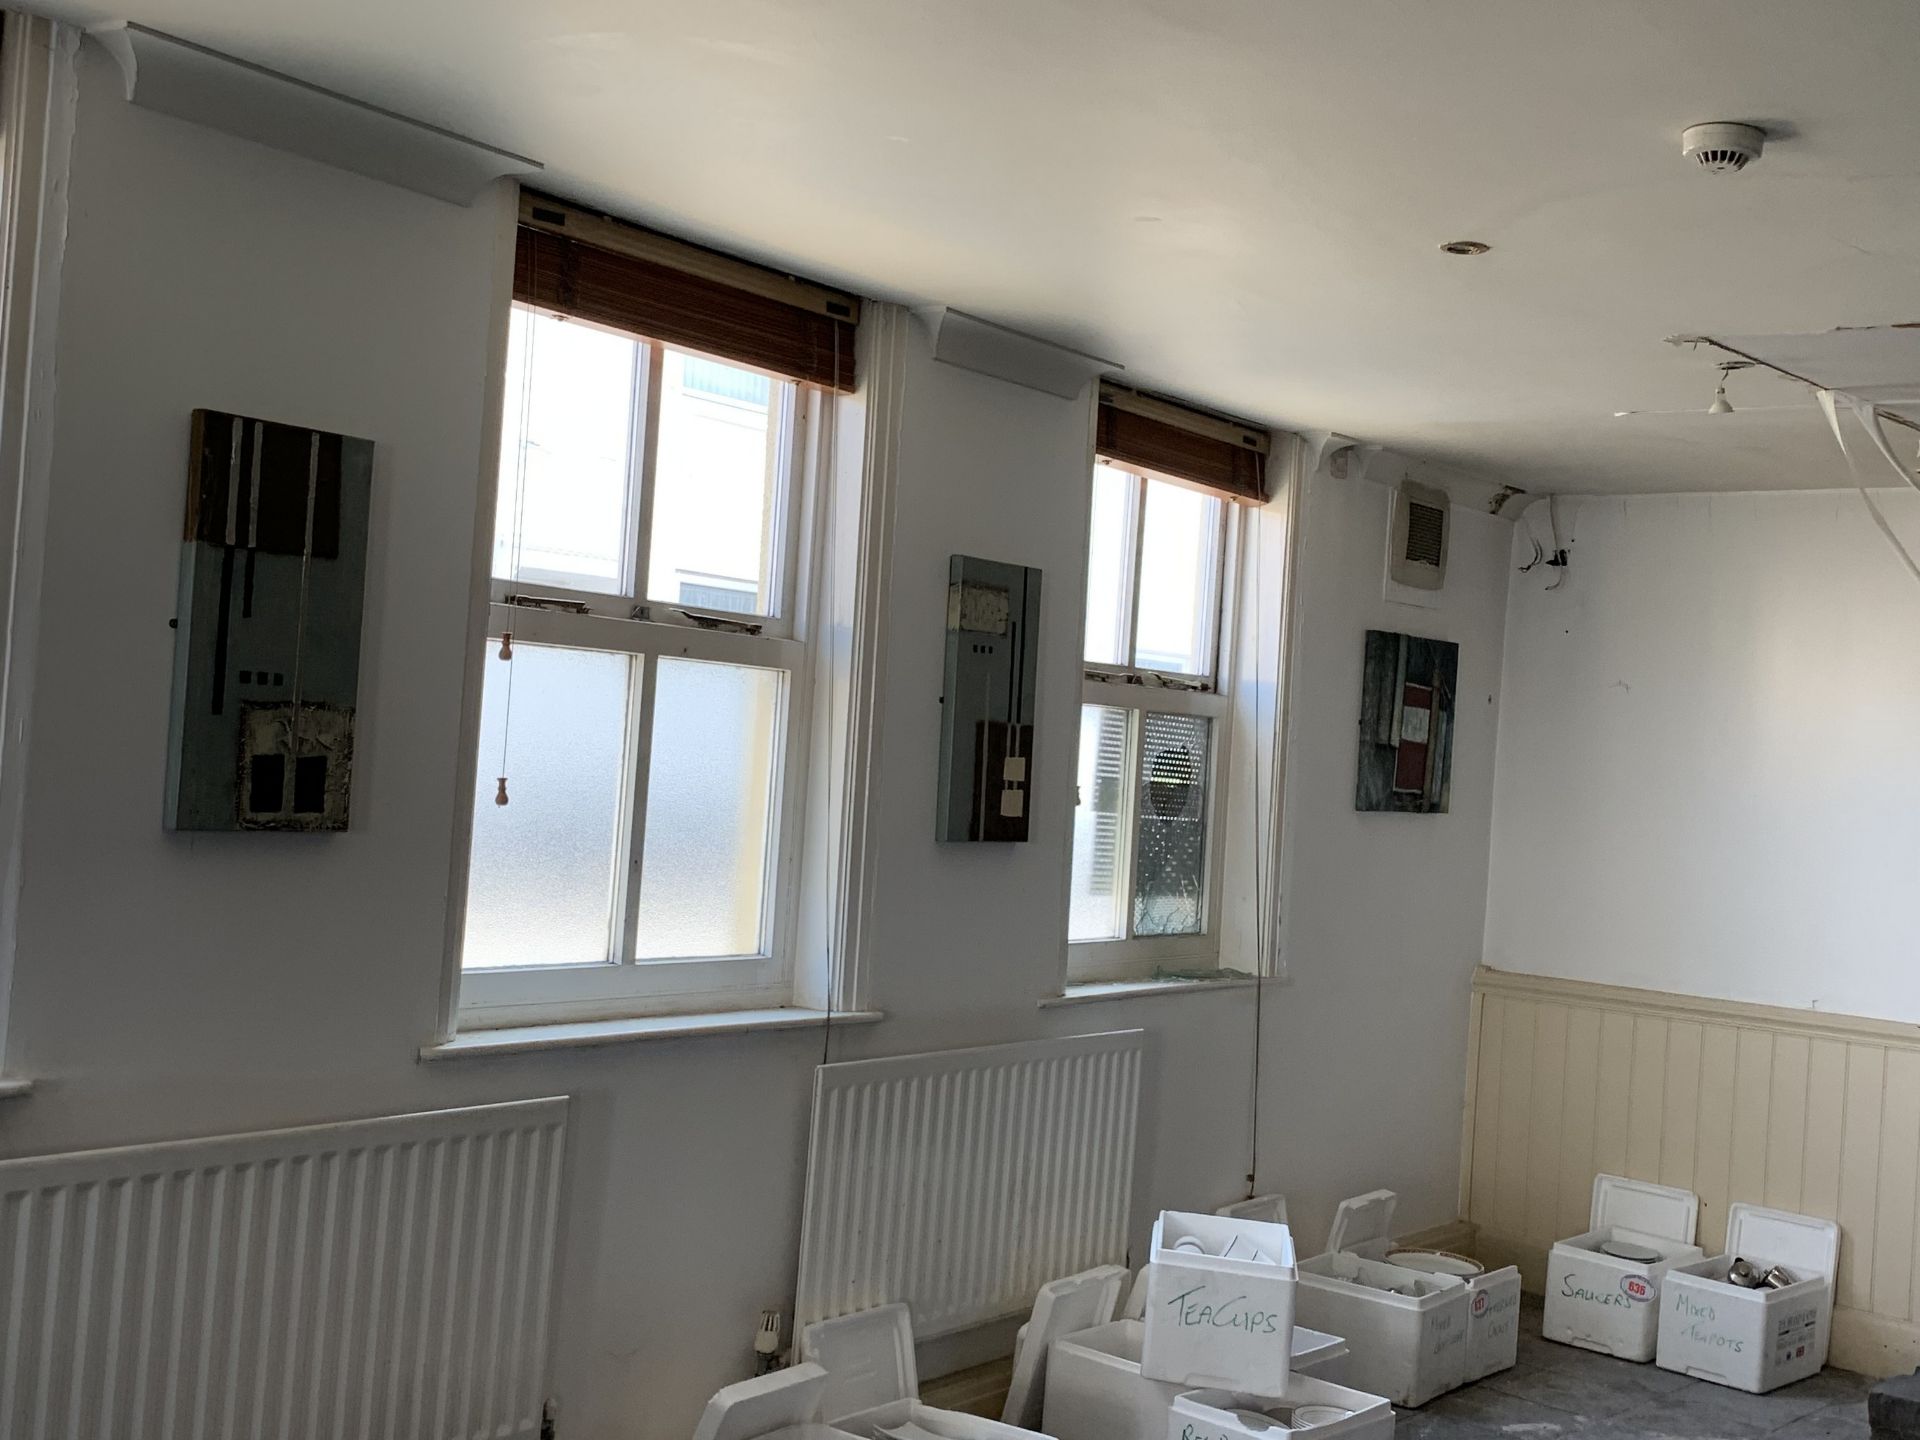 Approx 20 wall mounted pictures and blackboards (throughout the pub) - purchaser to remove - Image 4 of 4